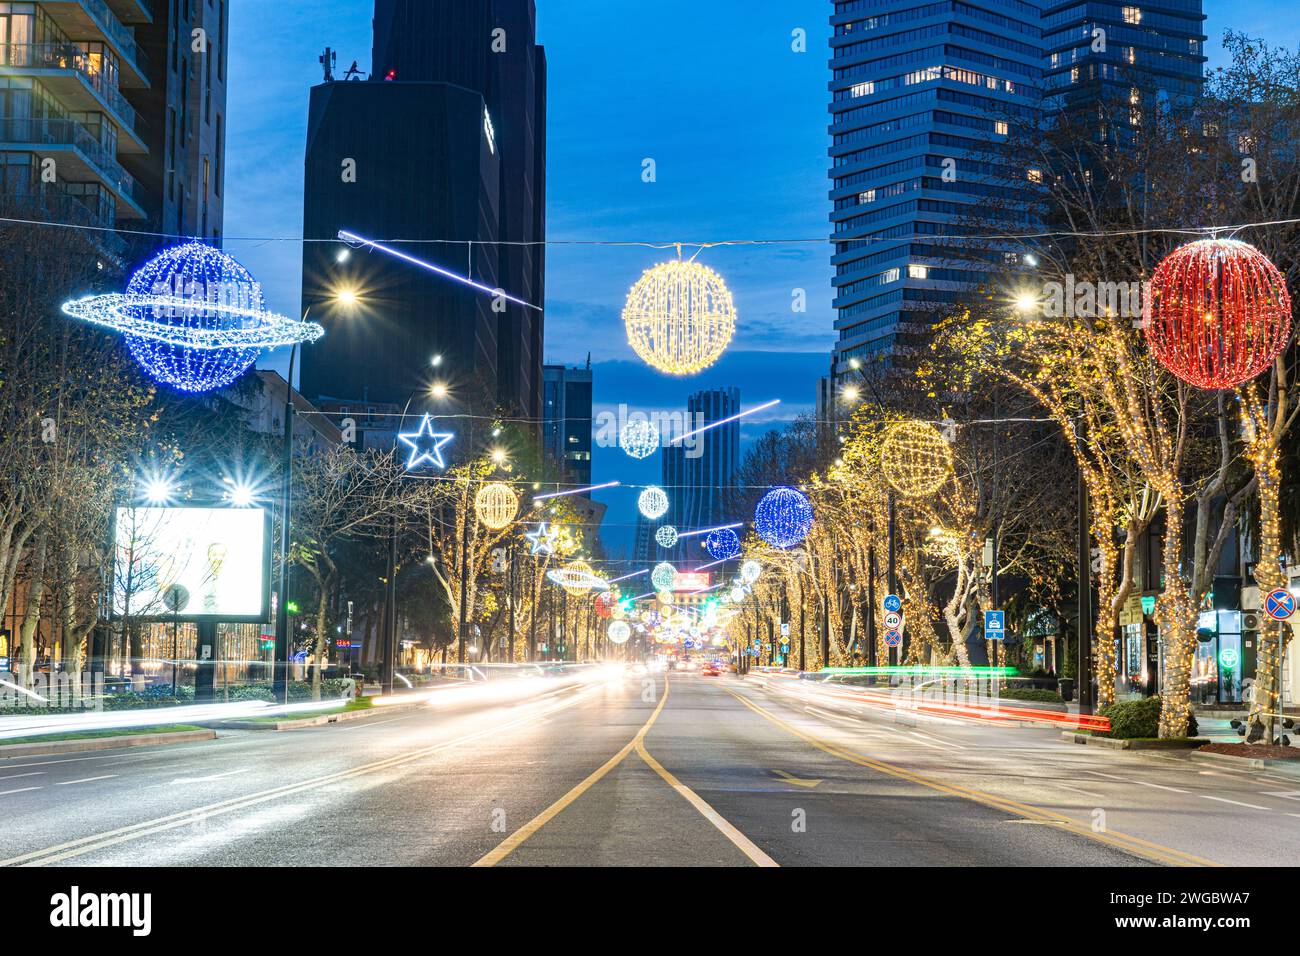 Downtown cityscape at night with solar system inspired lighting decorations, Vake, Tbilisi, Georgia Stock Photo